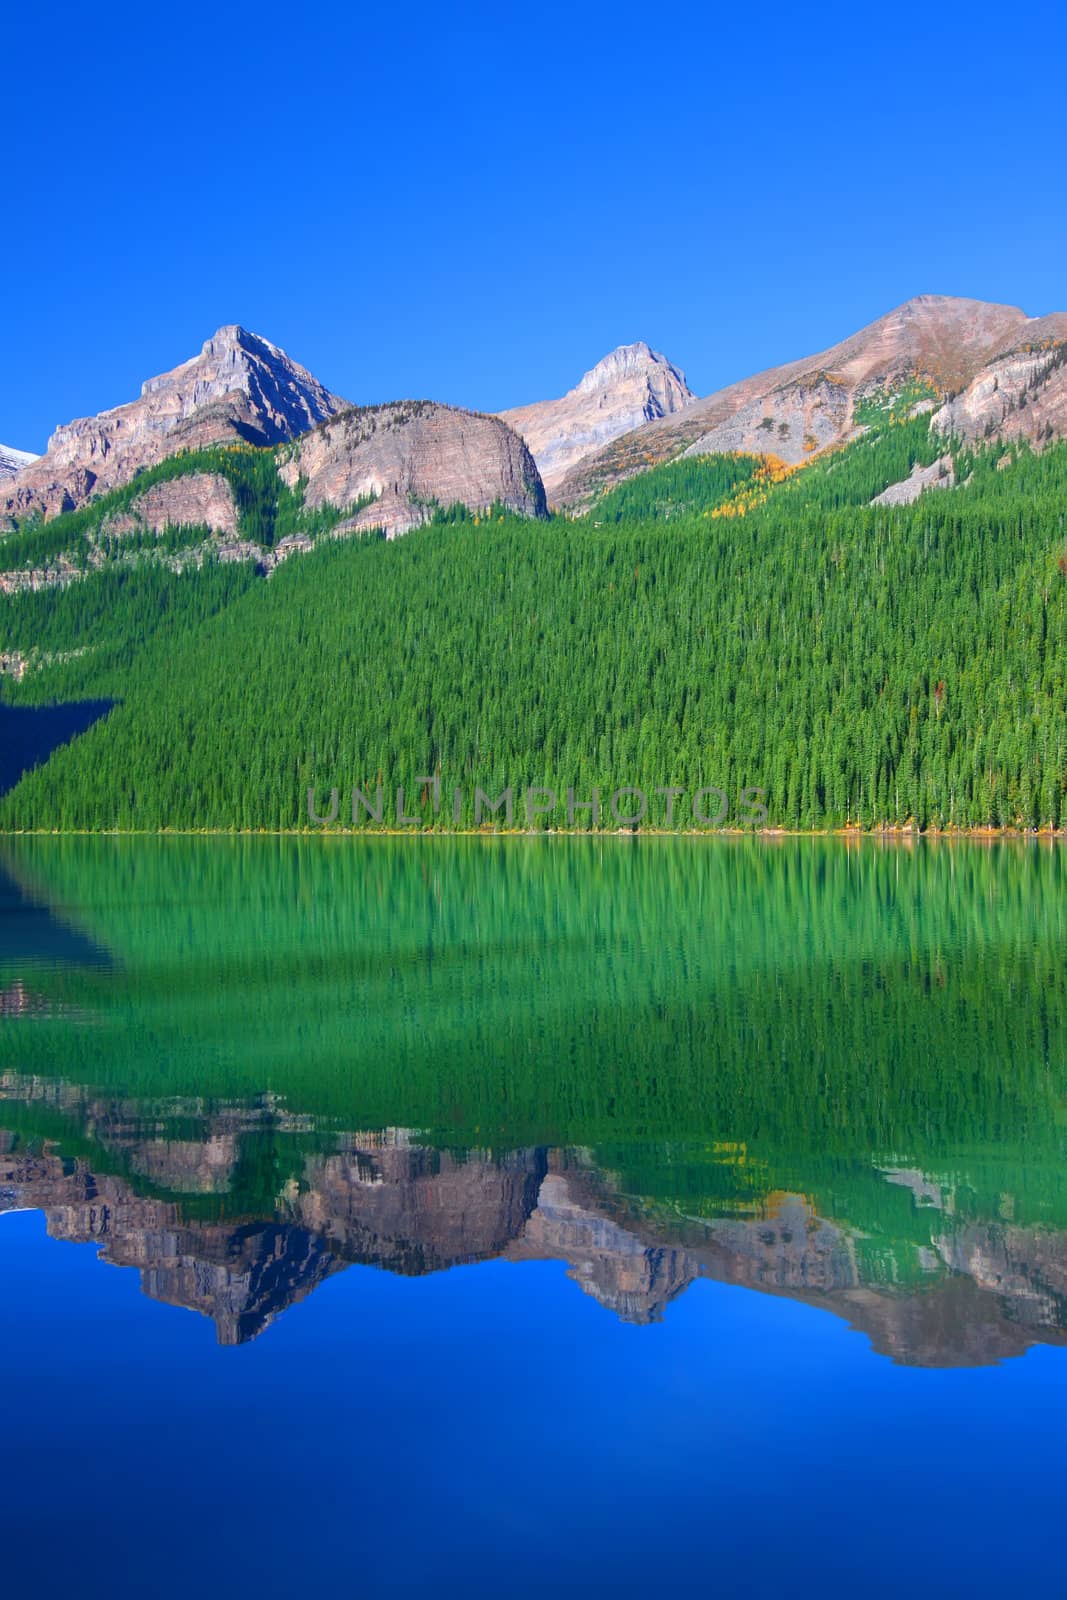 Treeline reflections on Lake Louise of Banff National Park in Canada.